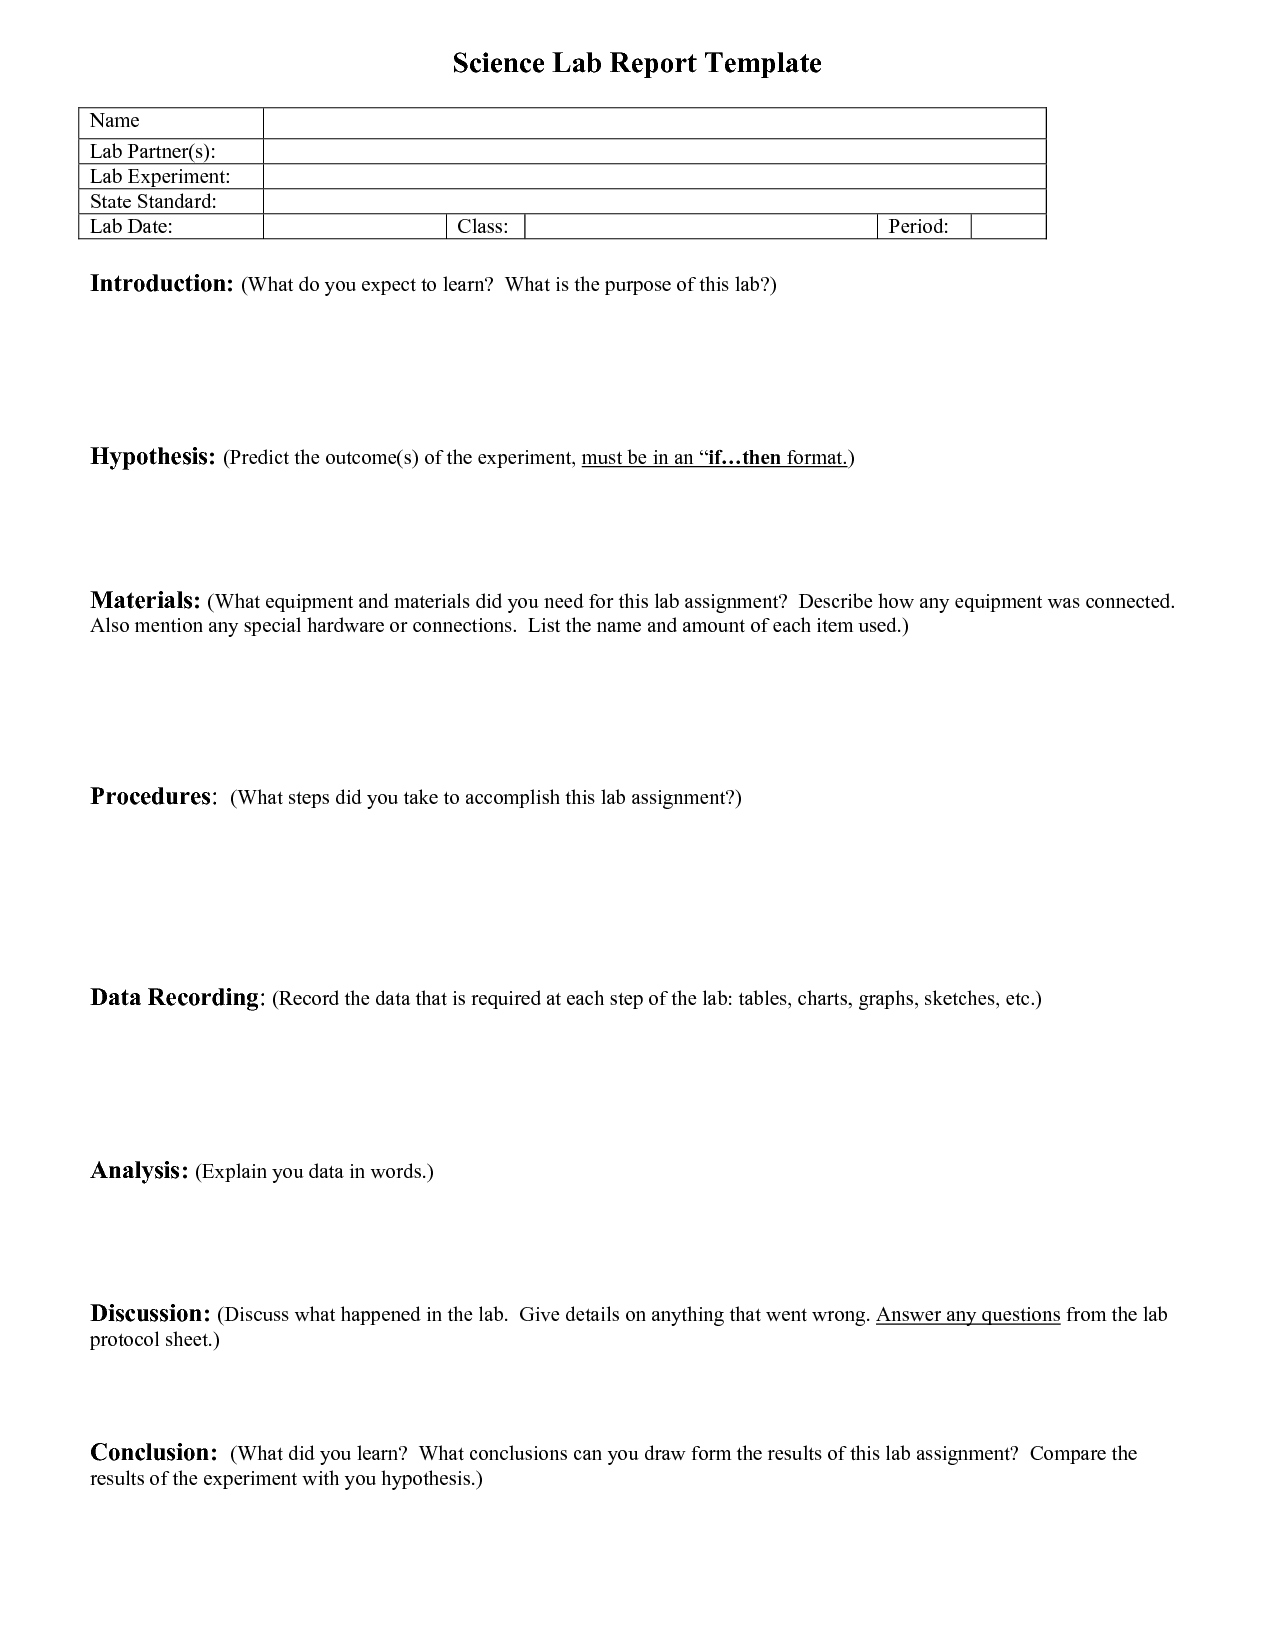 Lab Report Outline | Science Lab Report Template | Lab Throughout Science Lab Report Template